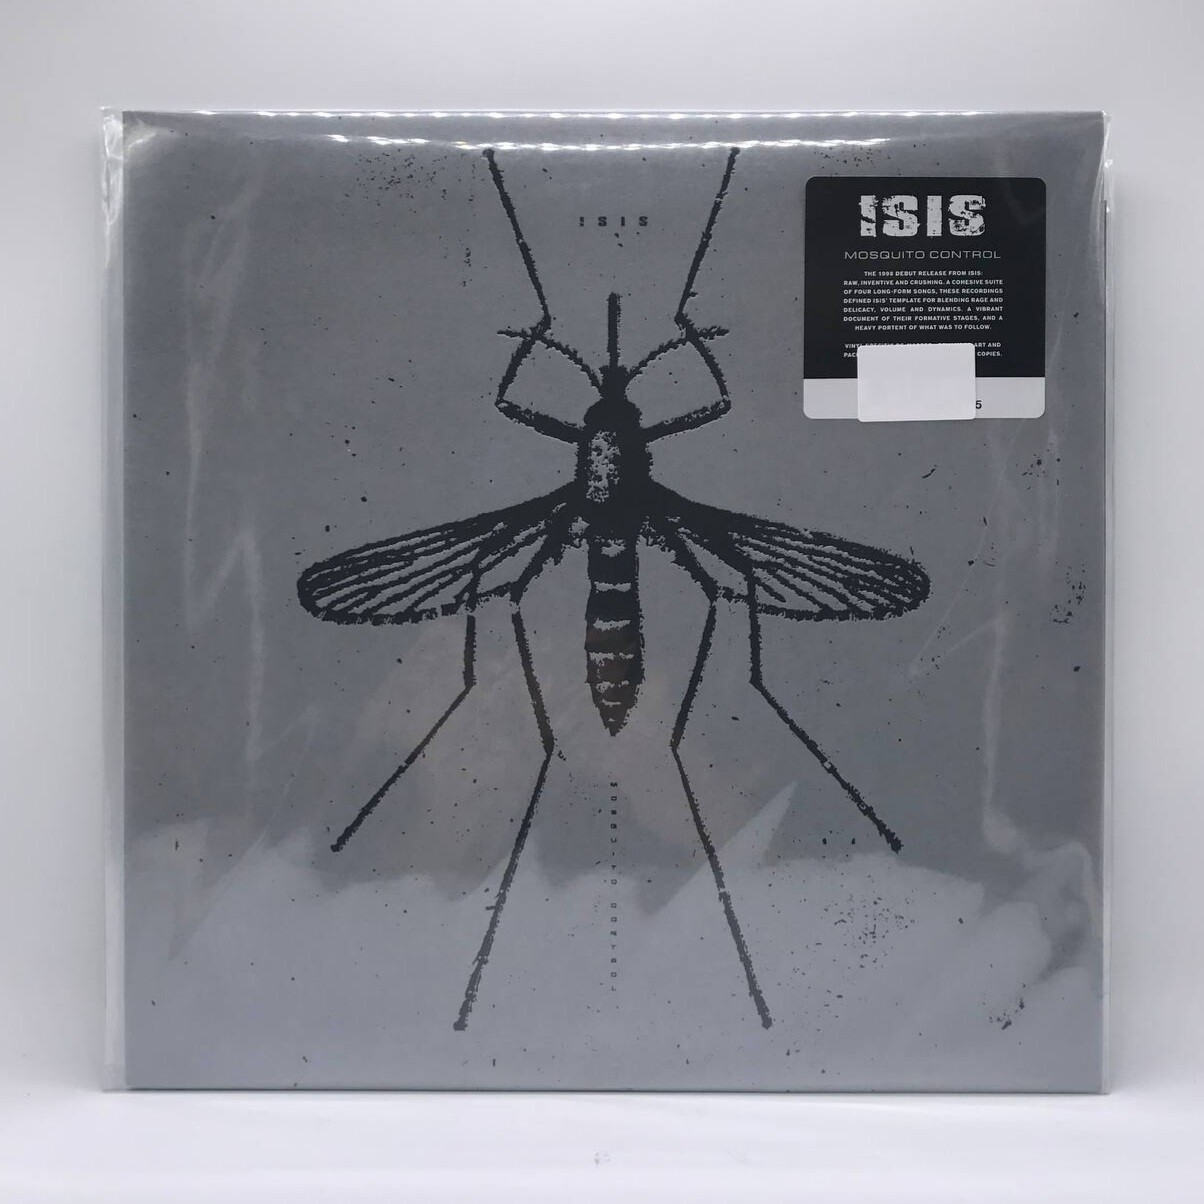 [USED] ISIS -MOSQUITO CONTROL- 12 INCH EP